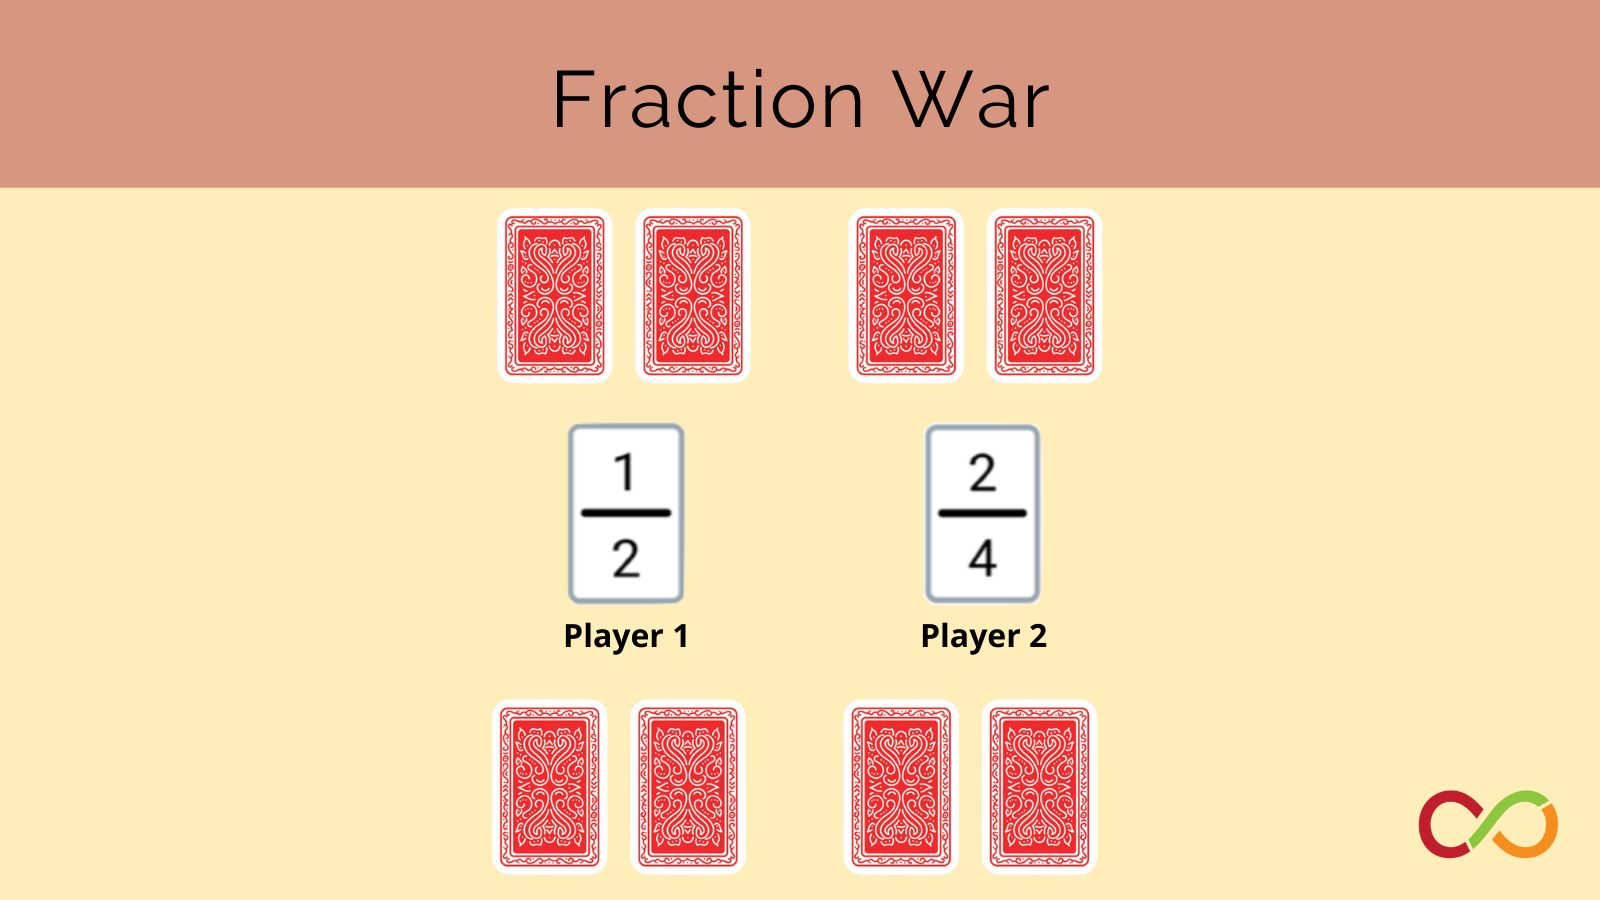 An image linking to the Fraction War lesson